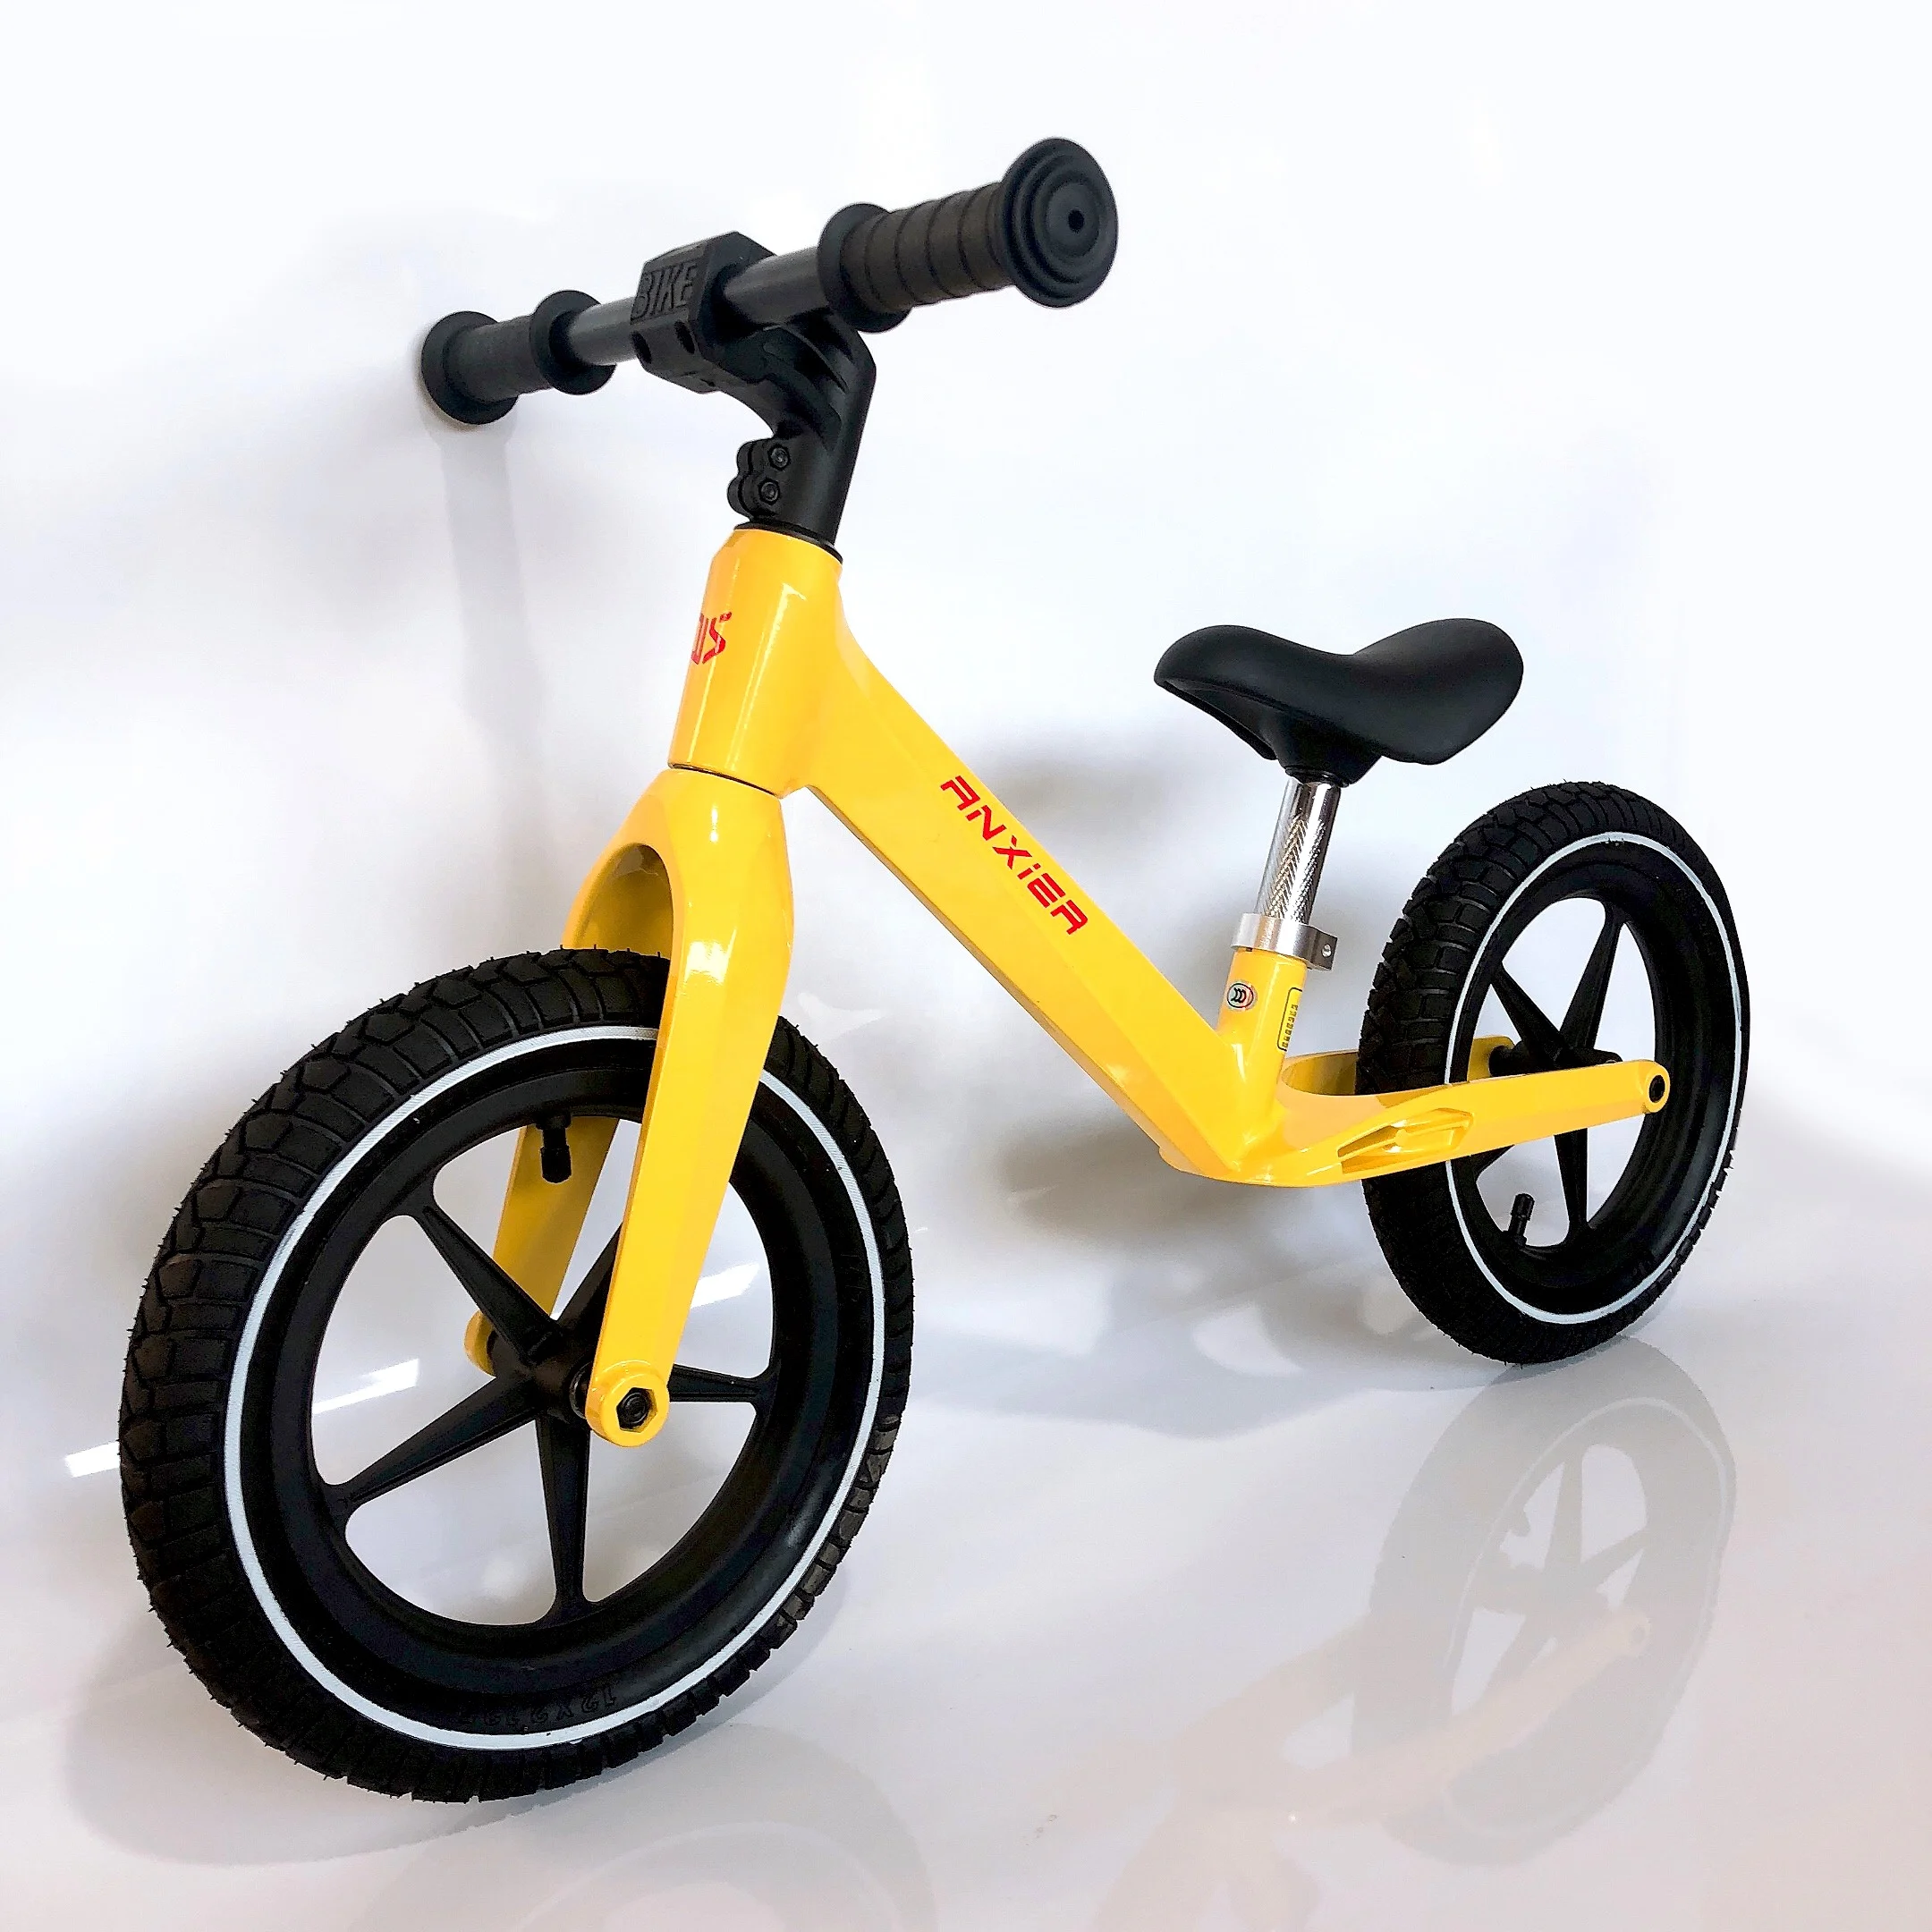 

CE balance bike hot selling 12inch magnesium multiple colors learn to ride a pedal bike or balance bike, Black pink blue